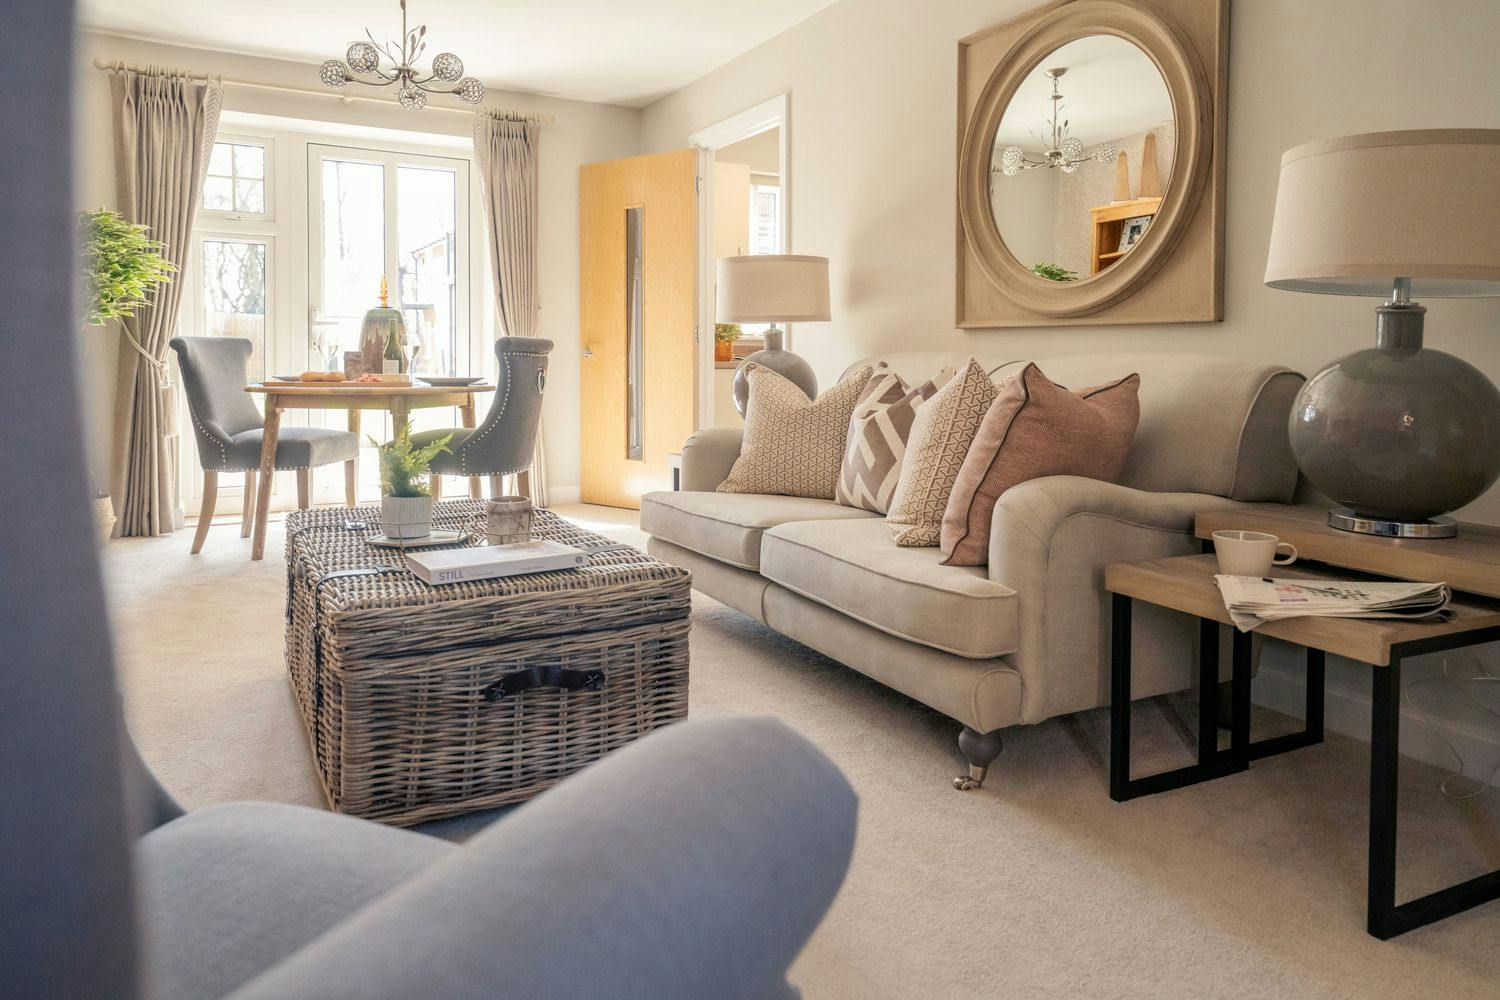 Living Room at Windsor House Retirement Development in Sheffield, South Yorkshire